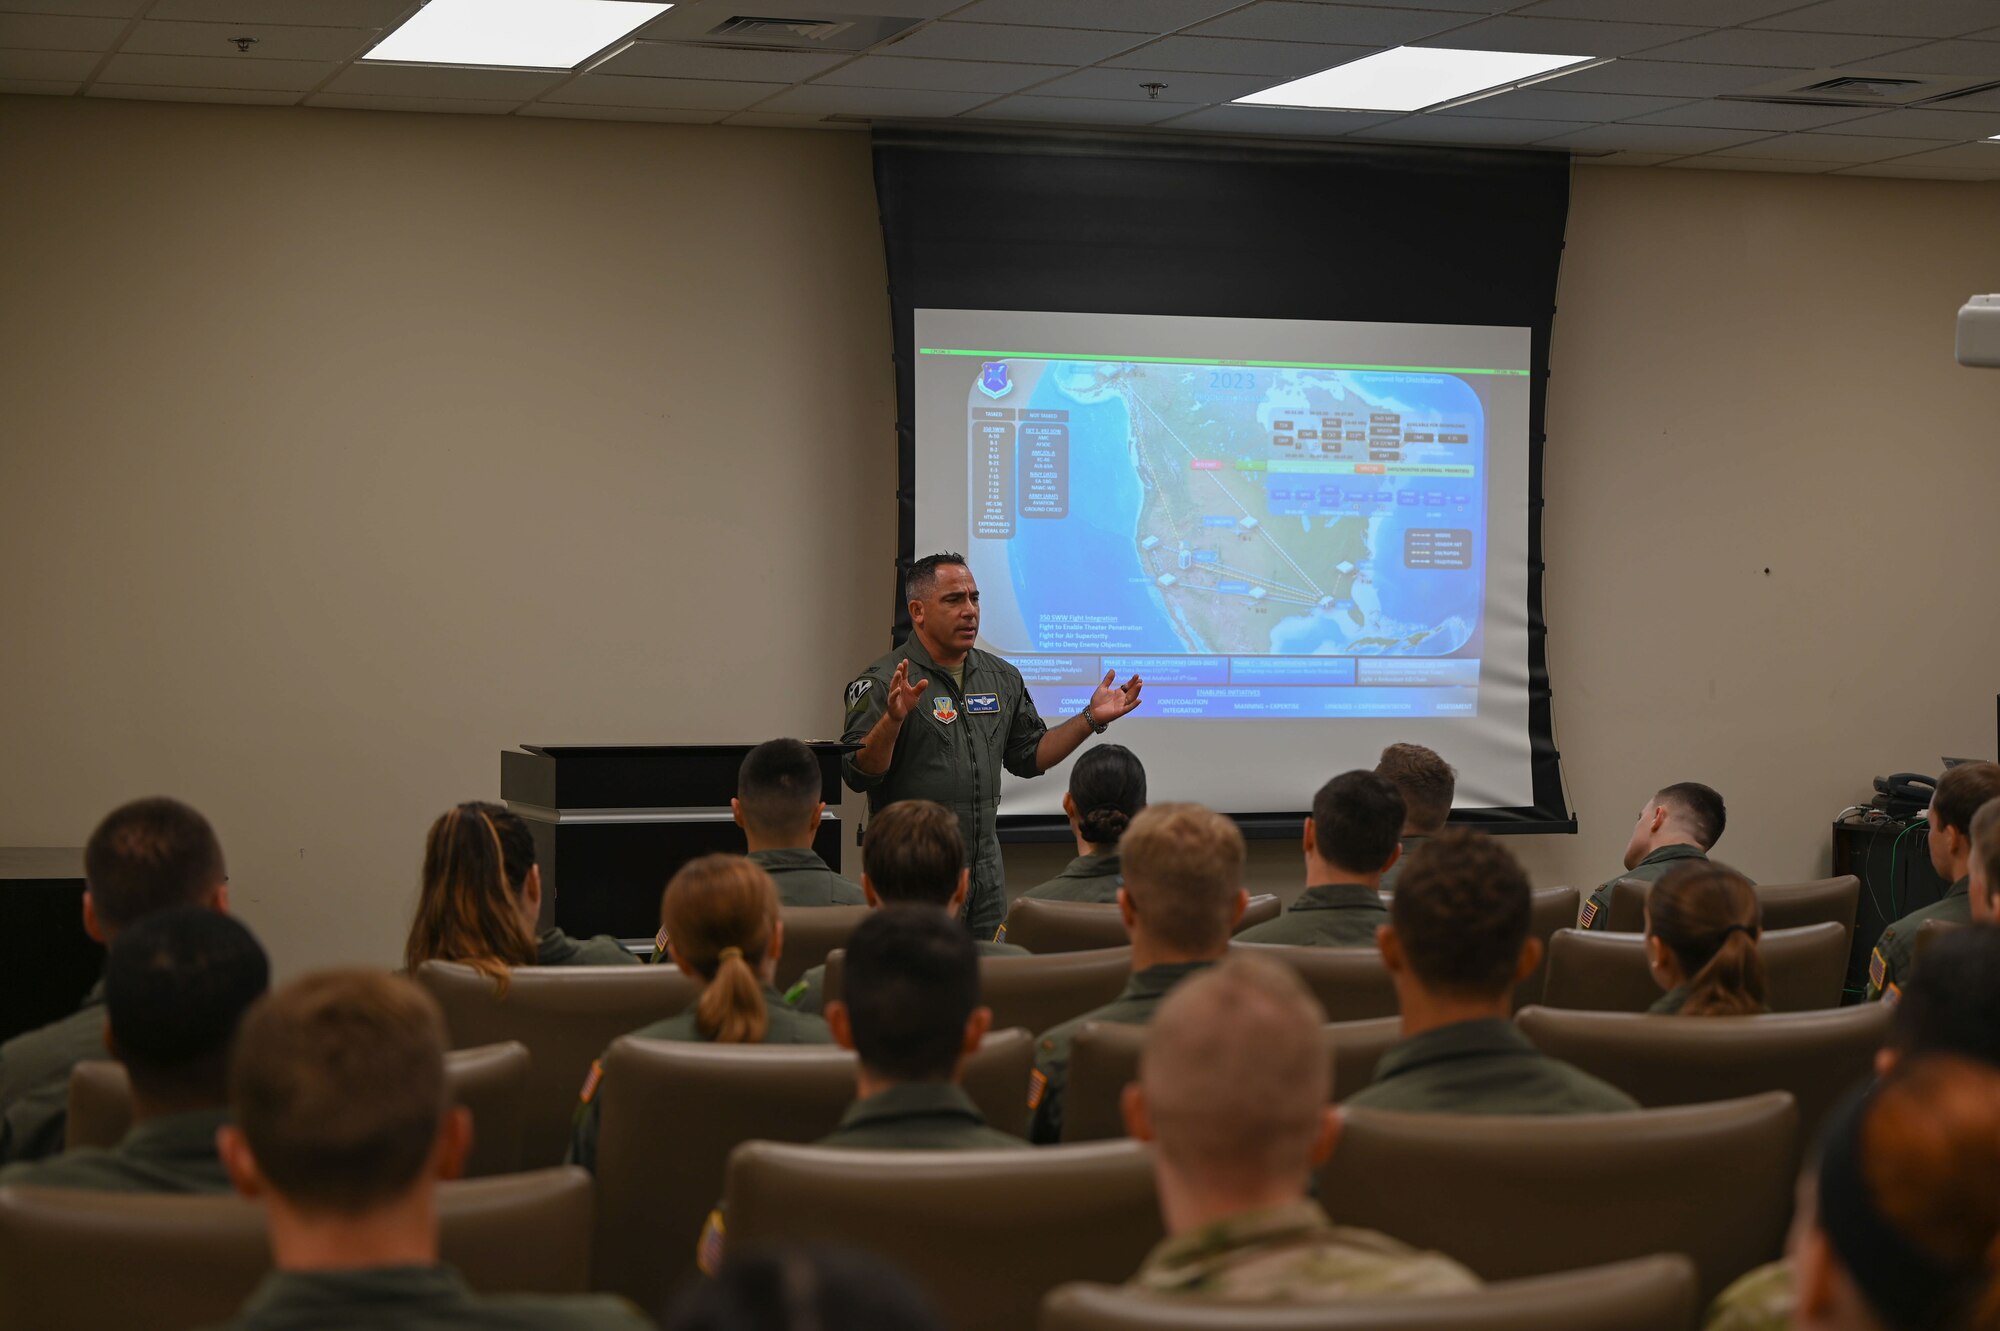 U.S. Air Force Col. Josh Koslov, 350th Spectrum Warfare Wing commander, briefs combat system officer students on operational and officer life during his visit to the 479th Flying Training Group at Naval Air Station Pensacola, Fla., Aug. 24, 2023. Koslov received a tour of the unit and talked with students, giving career advice and a brief on the 350th SWW. (U.S. Air Force photo by Capt. Benjamin Aronson)